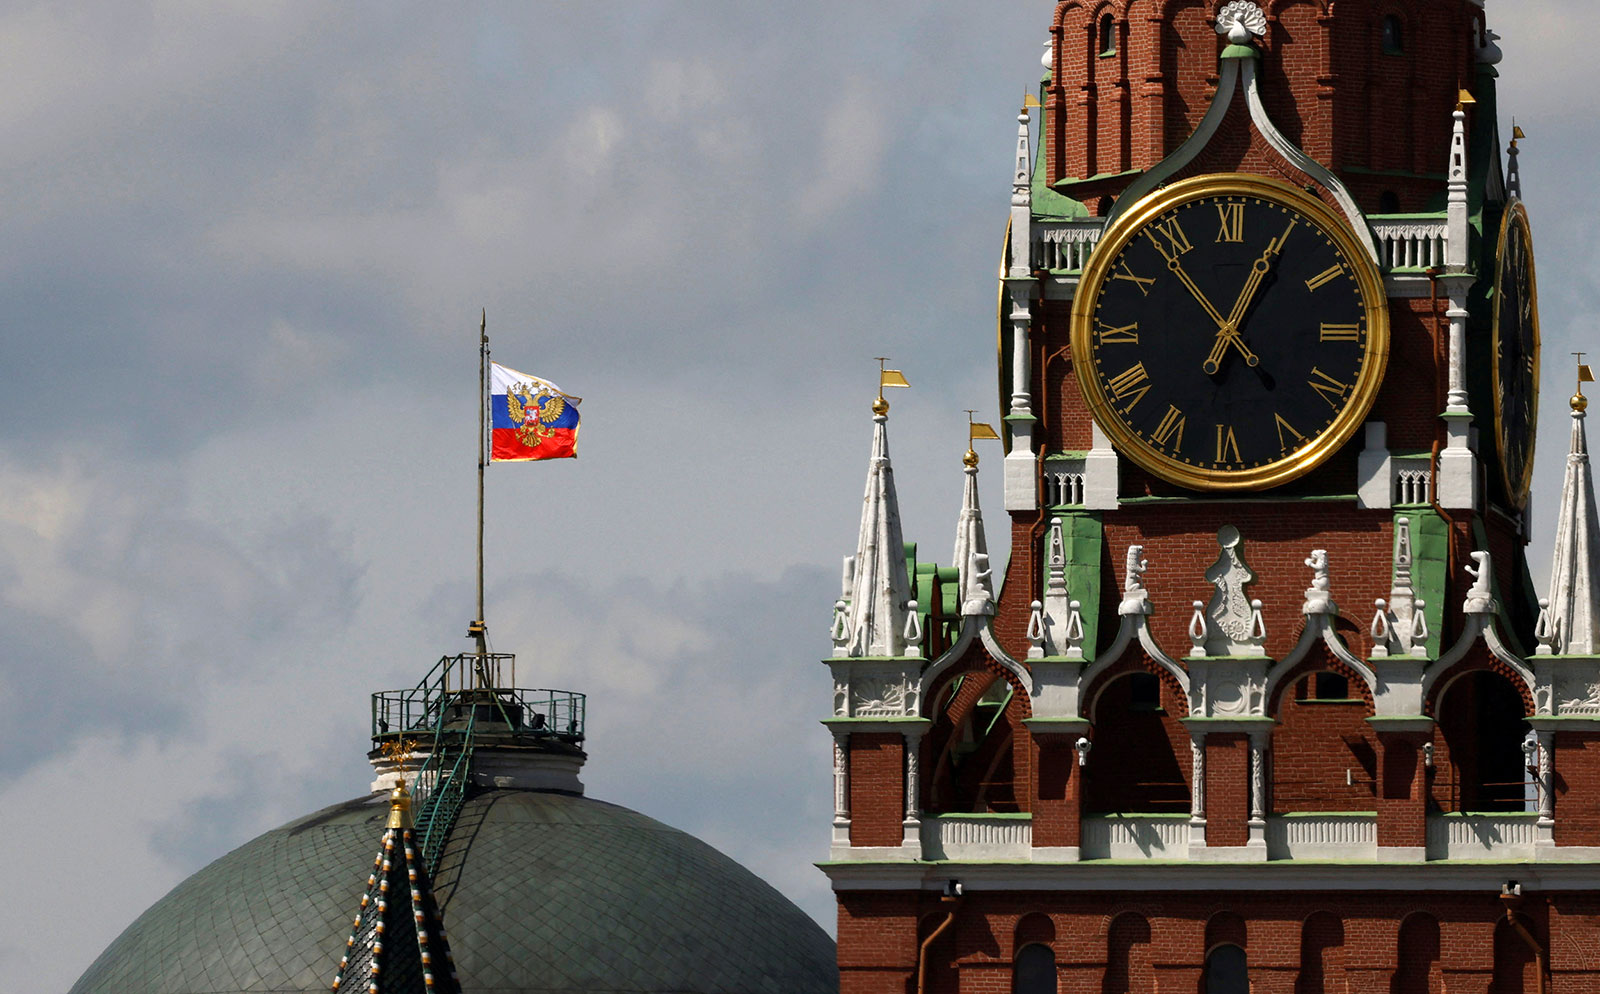 The Russian flag flies on the dome of the Kremlin Senate building, where the roof shows what appears to be damage from the recent drone incident, in Moscow, Russia, on May 4.